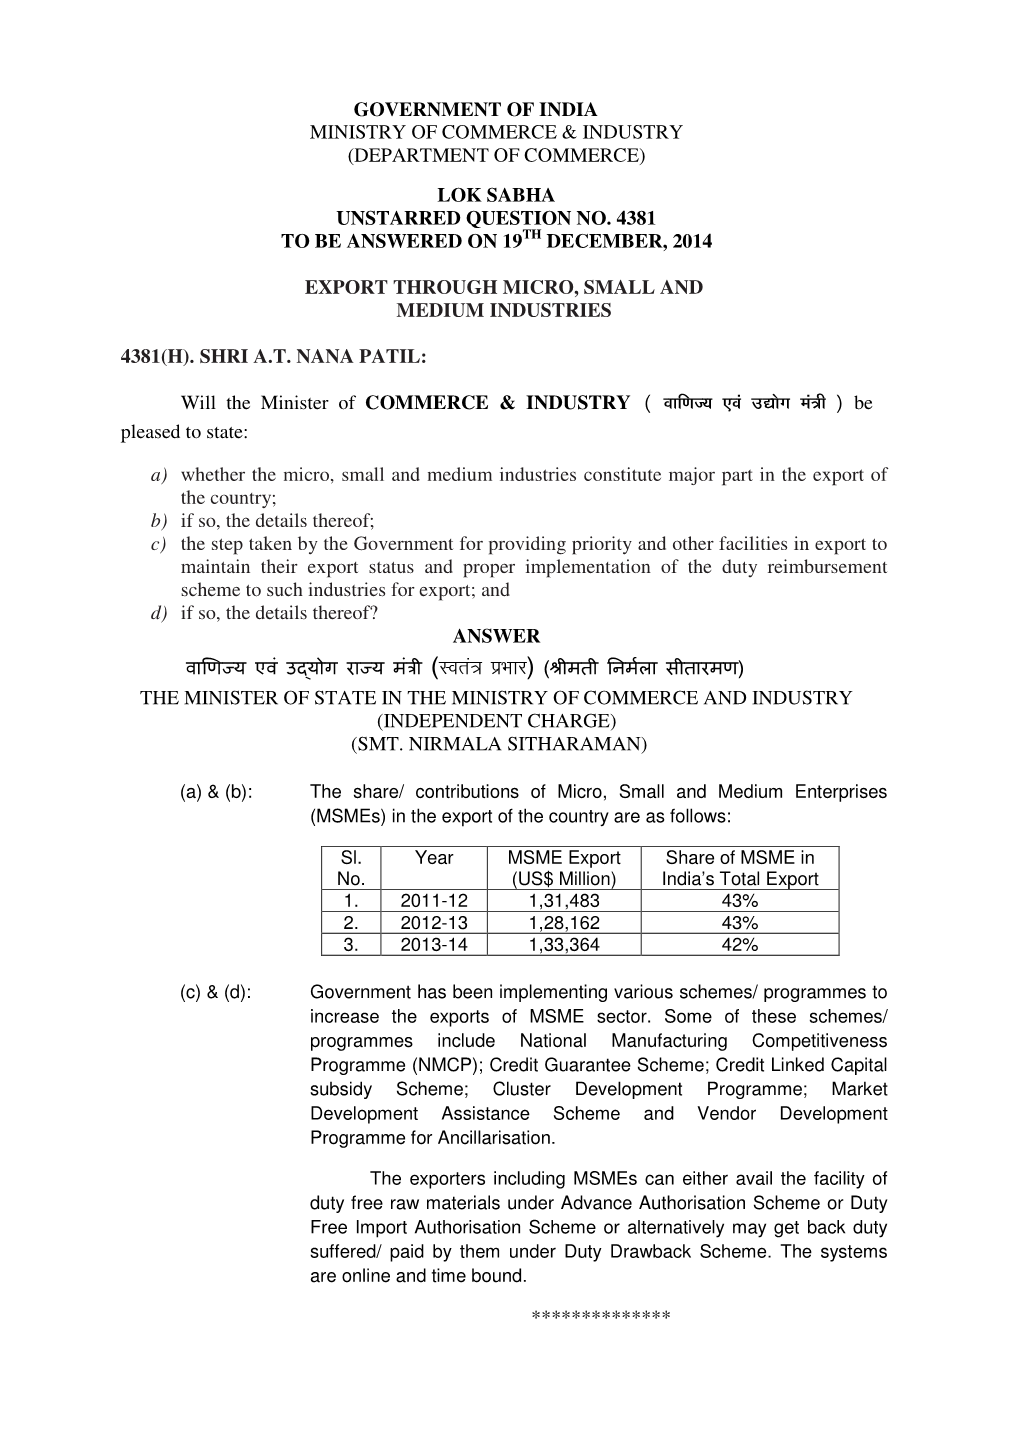 Lok Sabha Unstarred Question No. 4381 to Be Answered on 19Th December, 2014